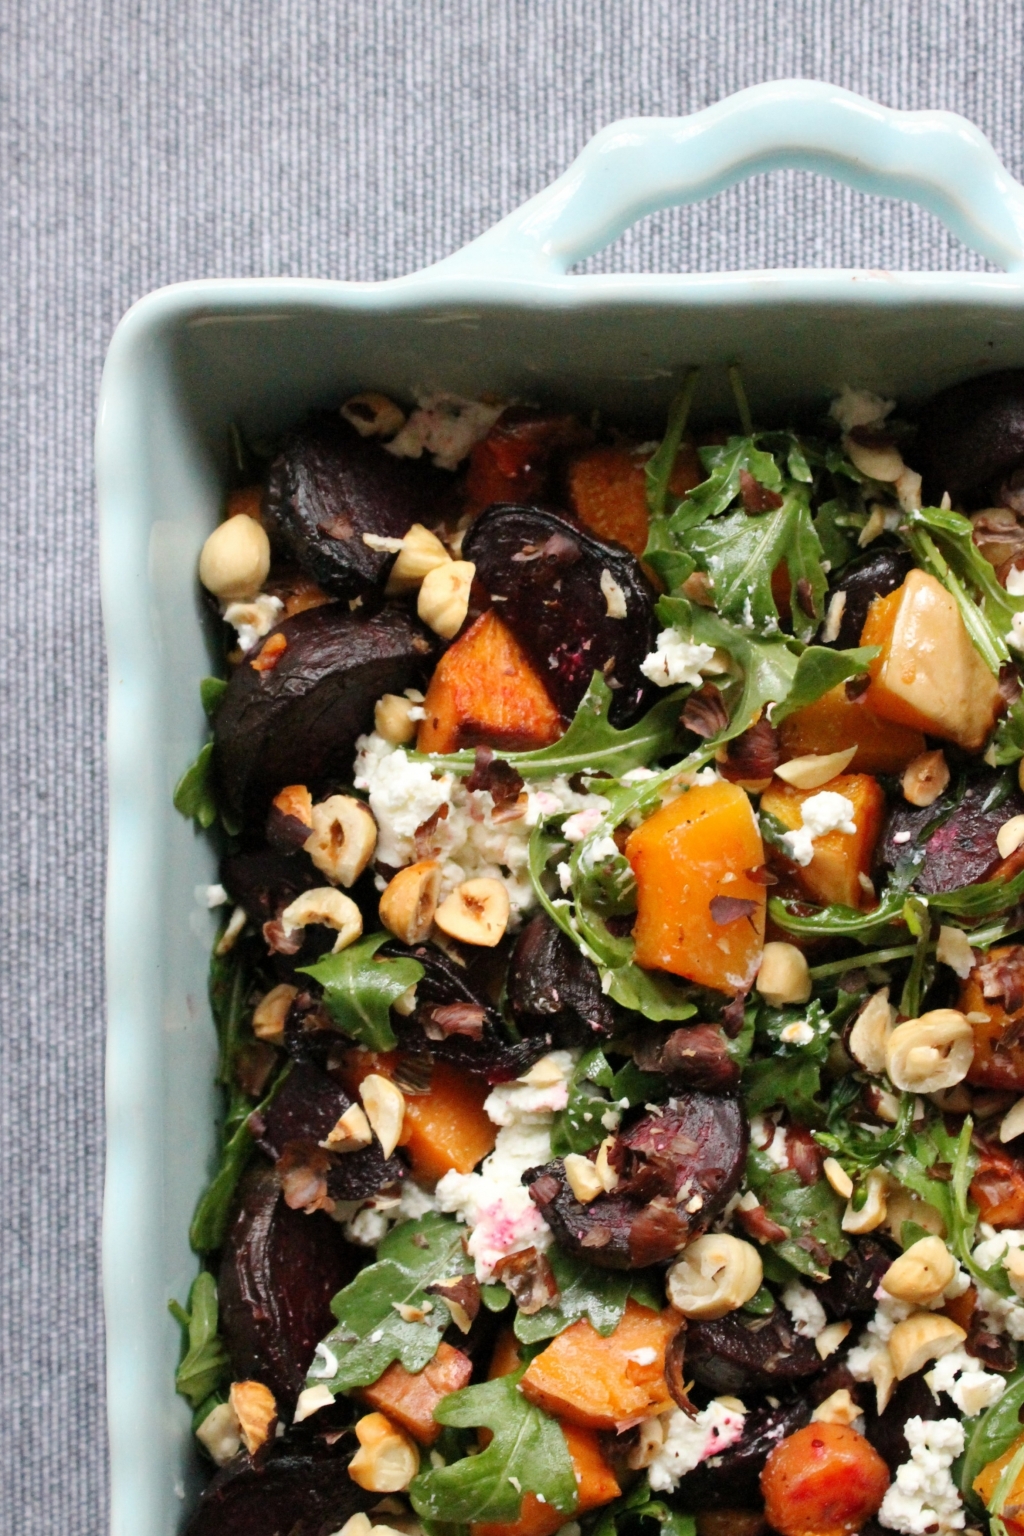 Roasted fall vegetable salad with hazelnuts and chèvre